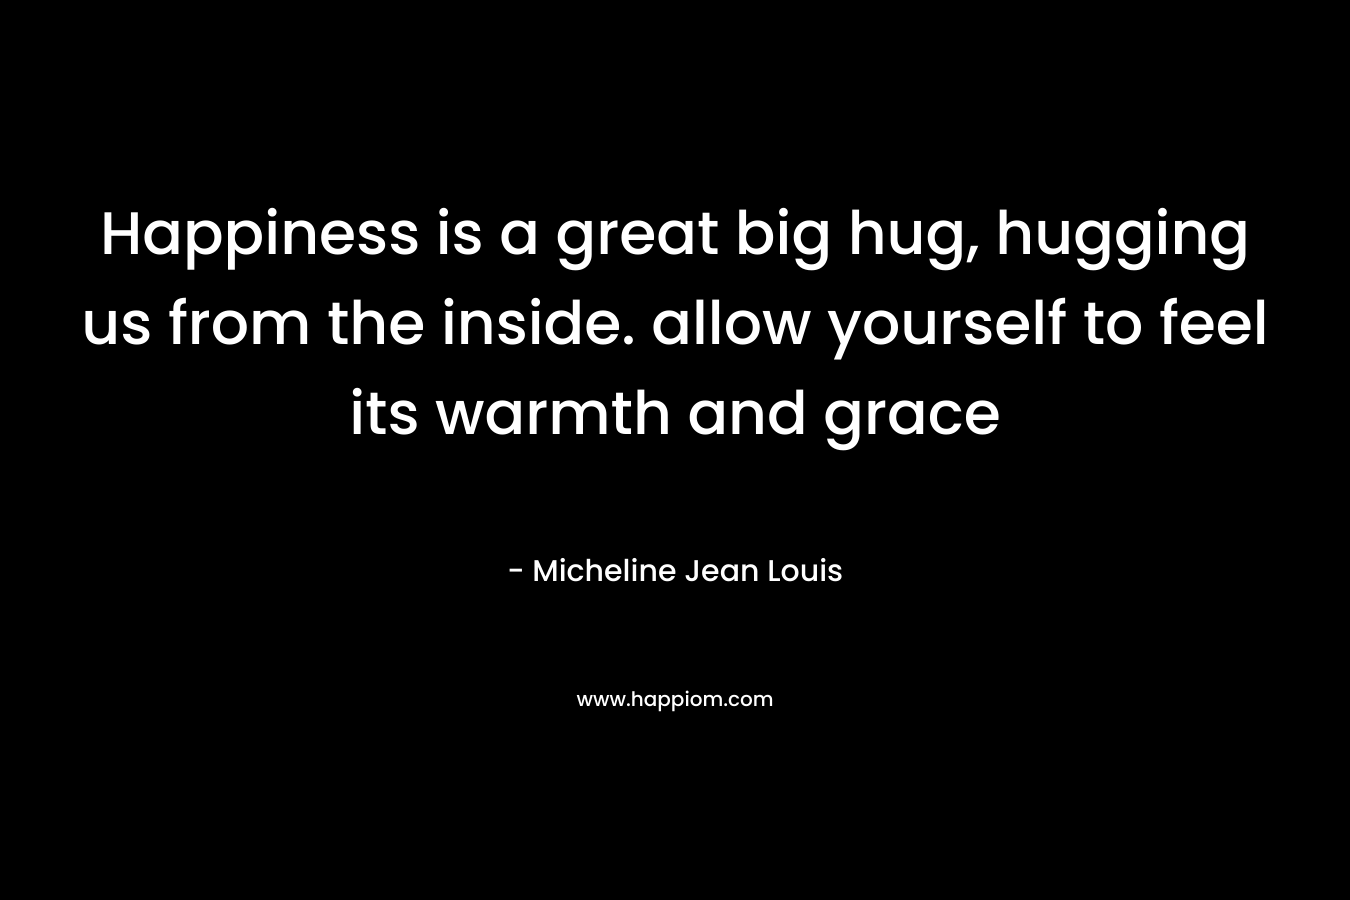 Happiness is a great big hug, hugging us from the inside. allow yourself to feel its warmth and grace